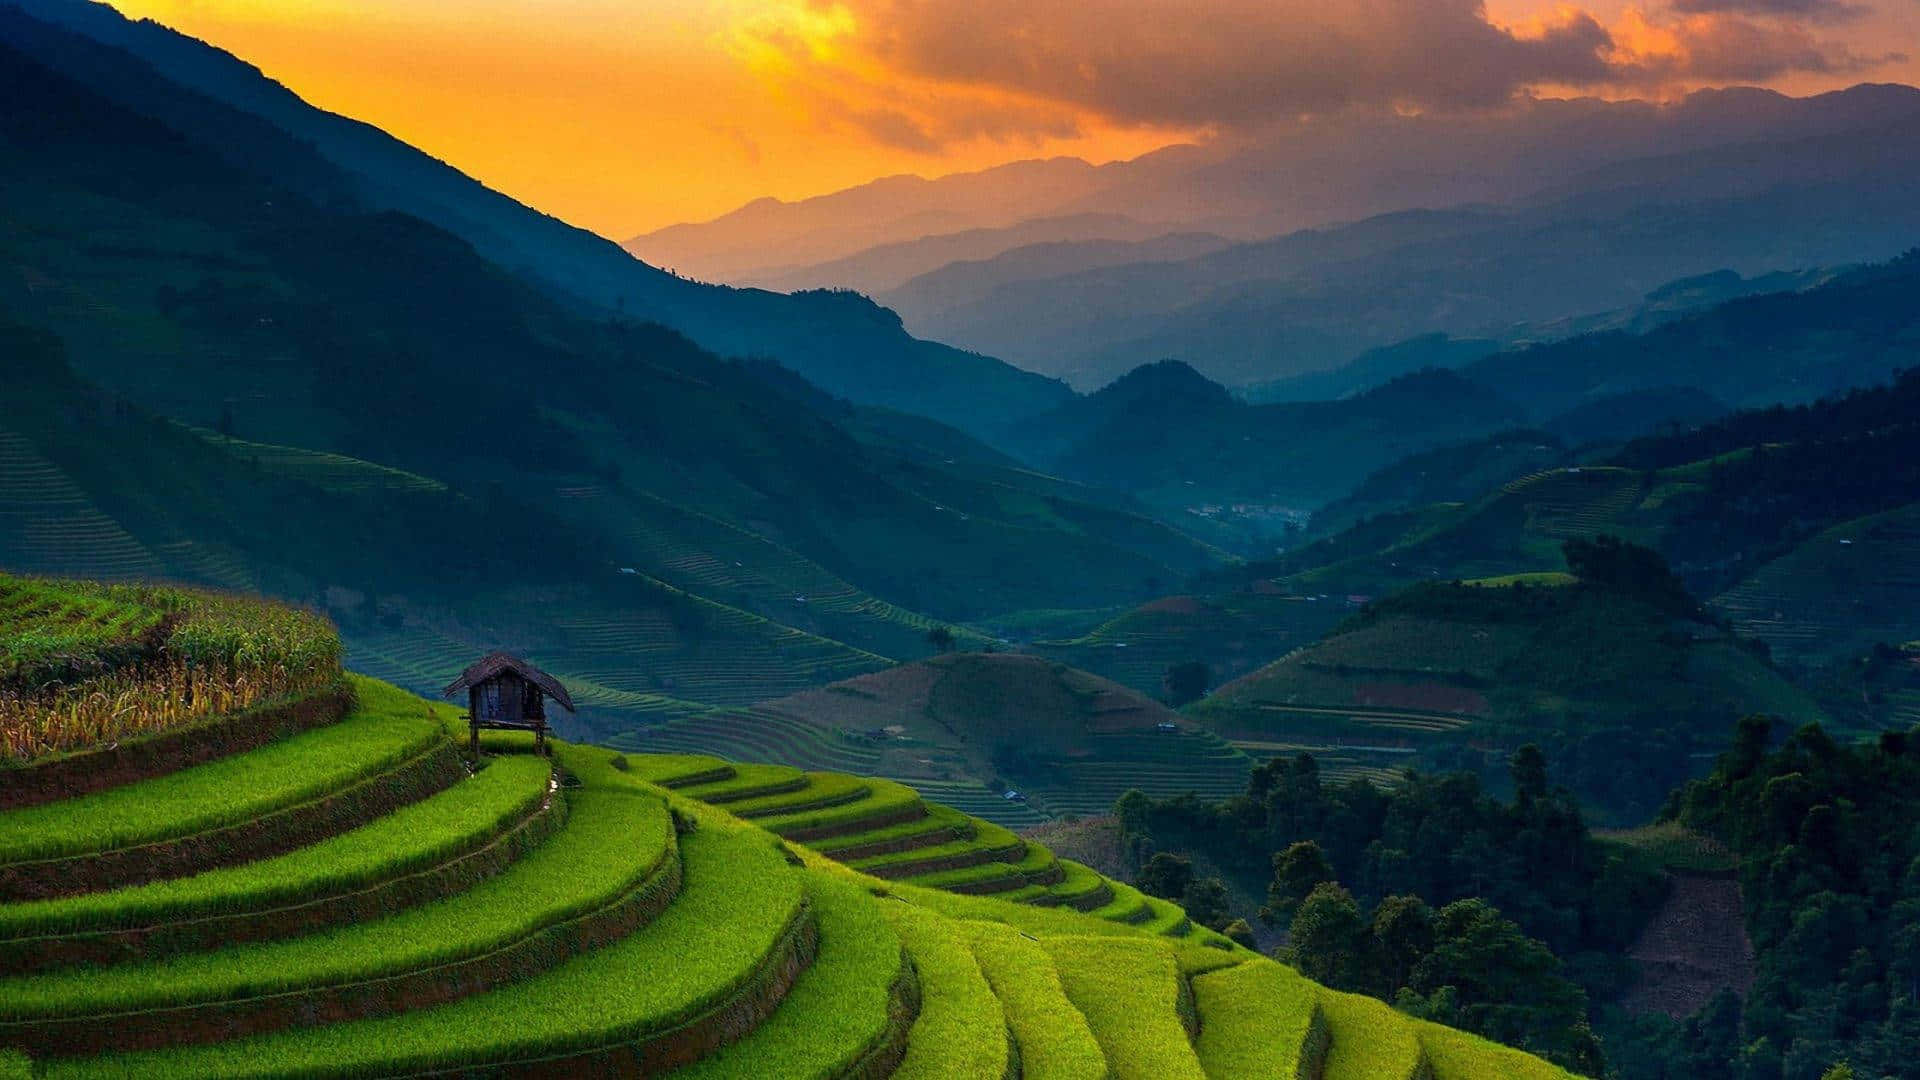 Banaue Rice Terraces In The Philippines During Dusk Wallpaper